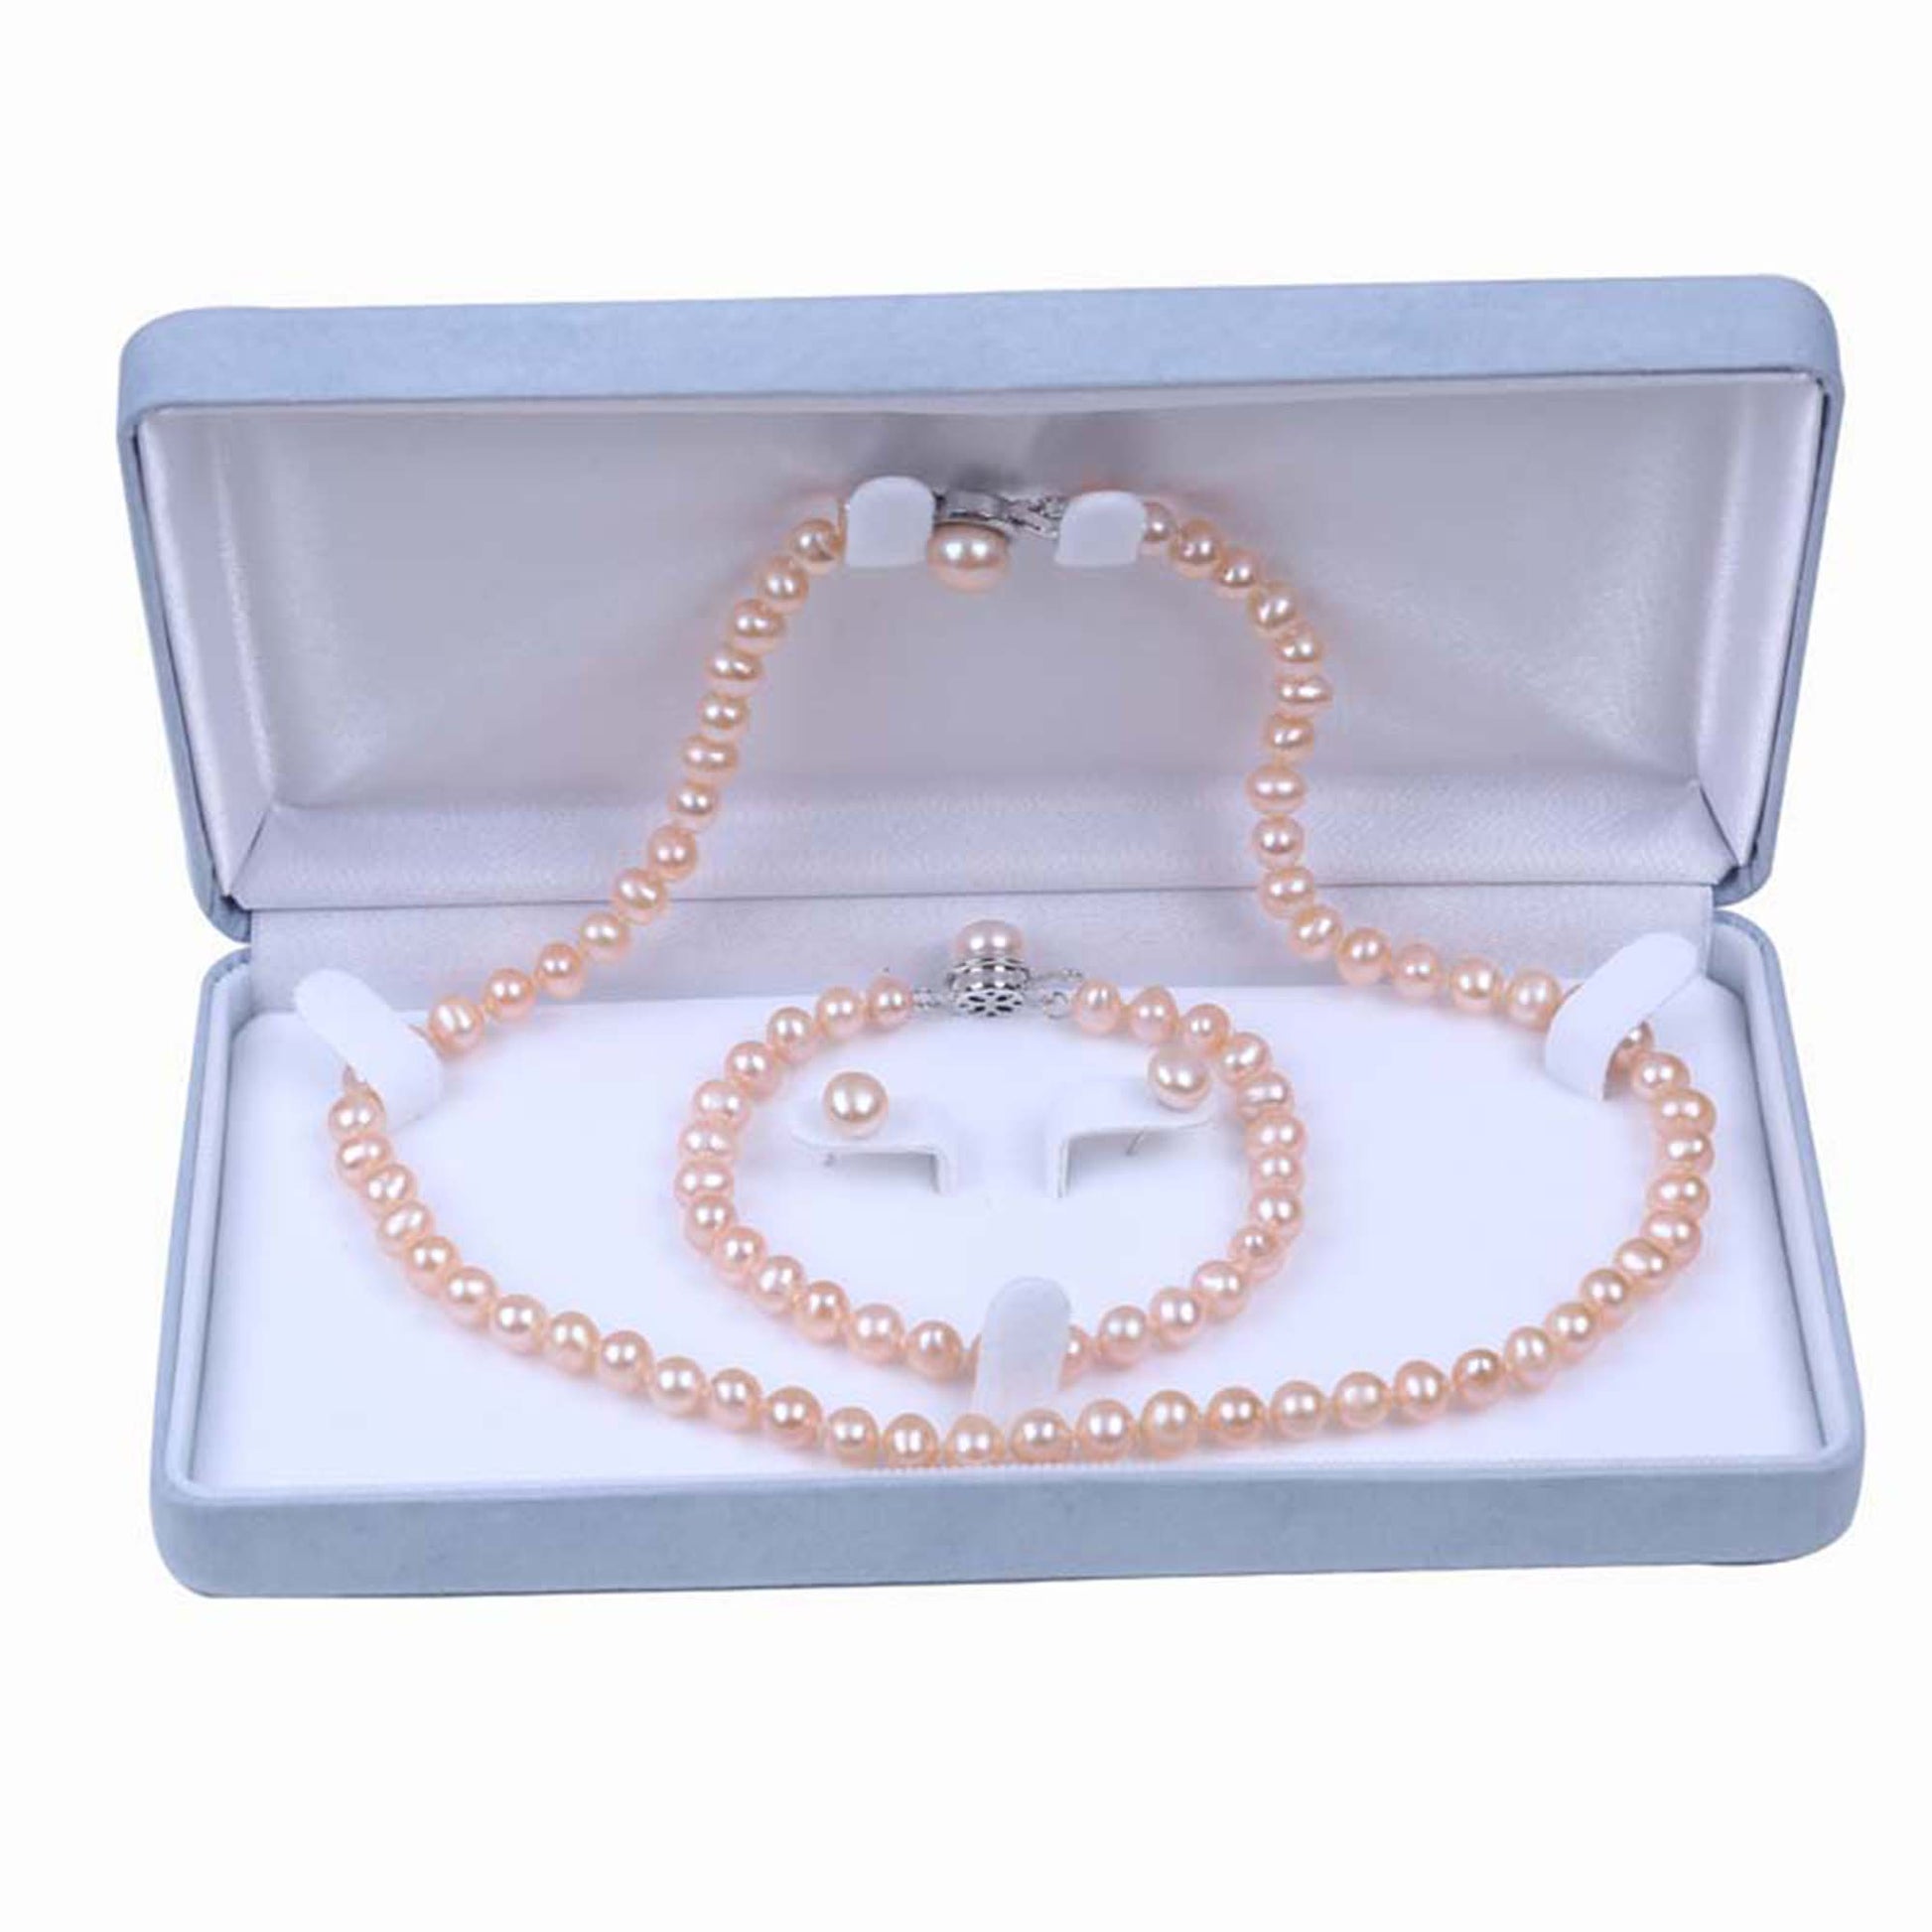 3 piece freshwater Pearl Sets in Gift Box - Providence silver gold jewelry usa